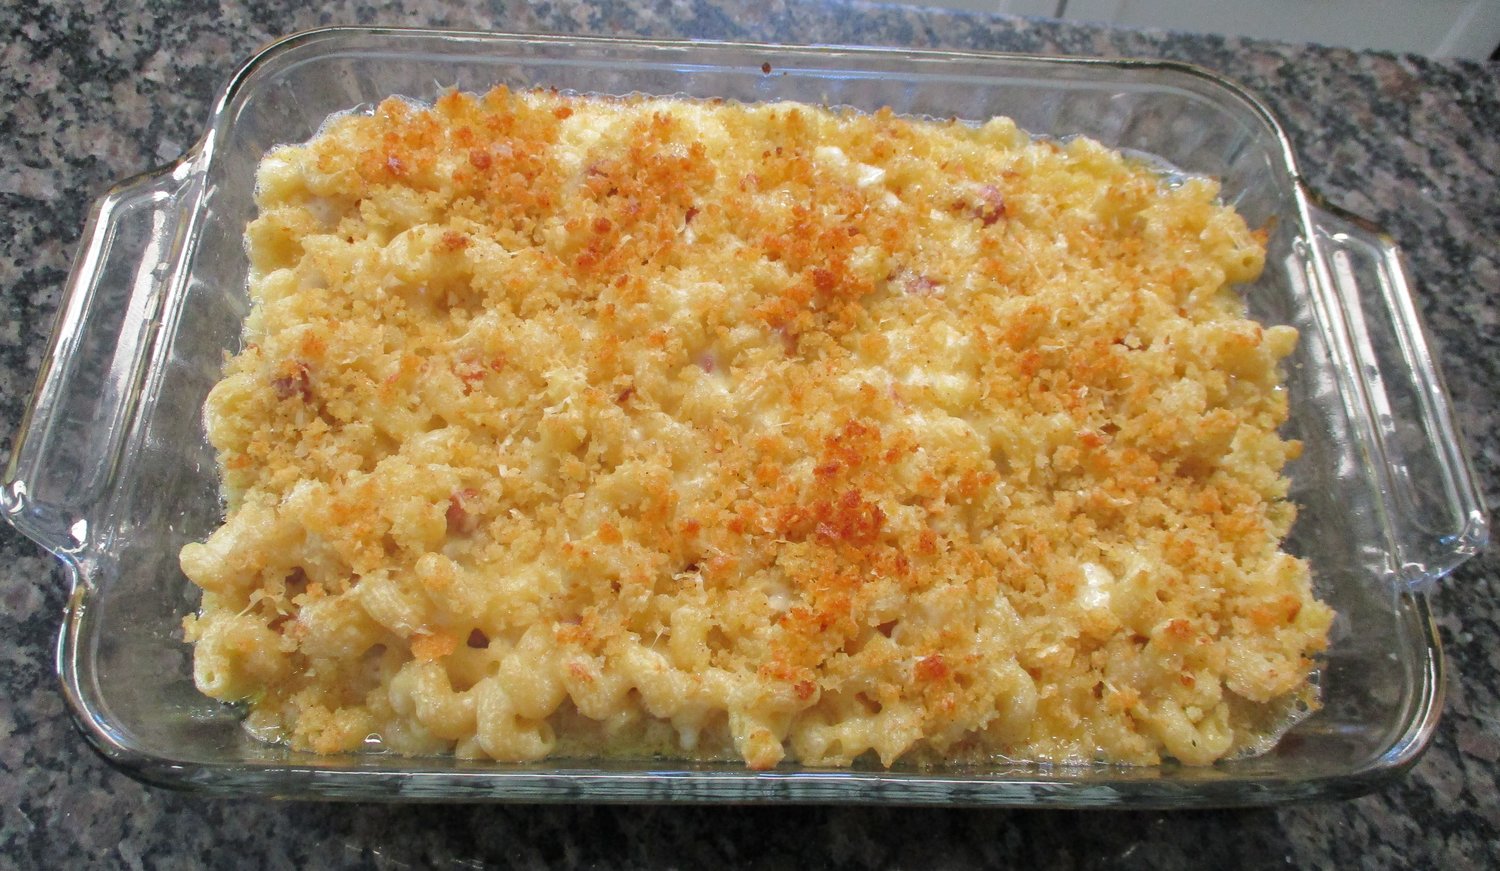 The finished macaroni and cheese, updated for modern tastes.